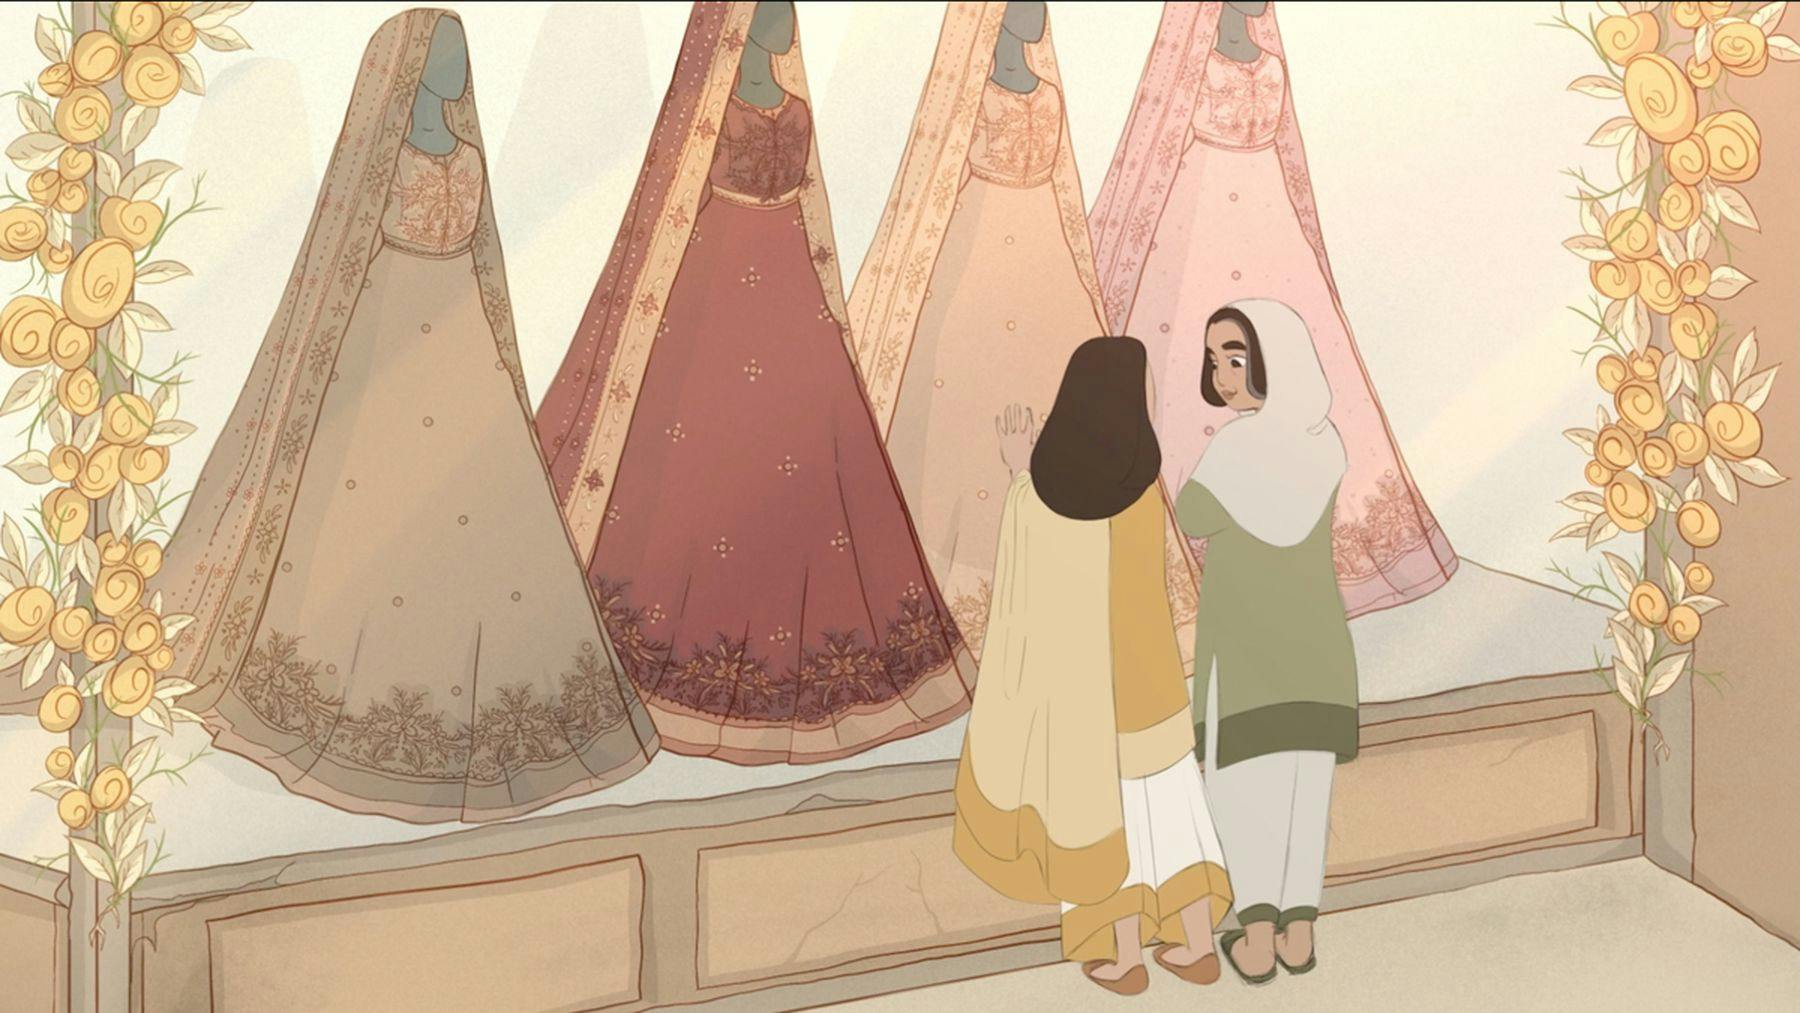 An illustration of two people standing in front of a display of ornate dresses with long bridal veils. One person wearing a headscarf turns to face the other who is facing away from the viewer.